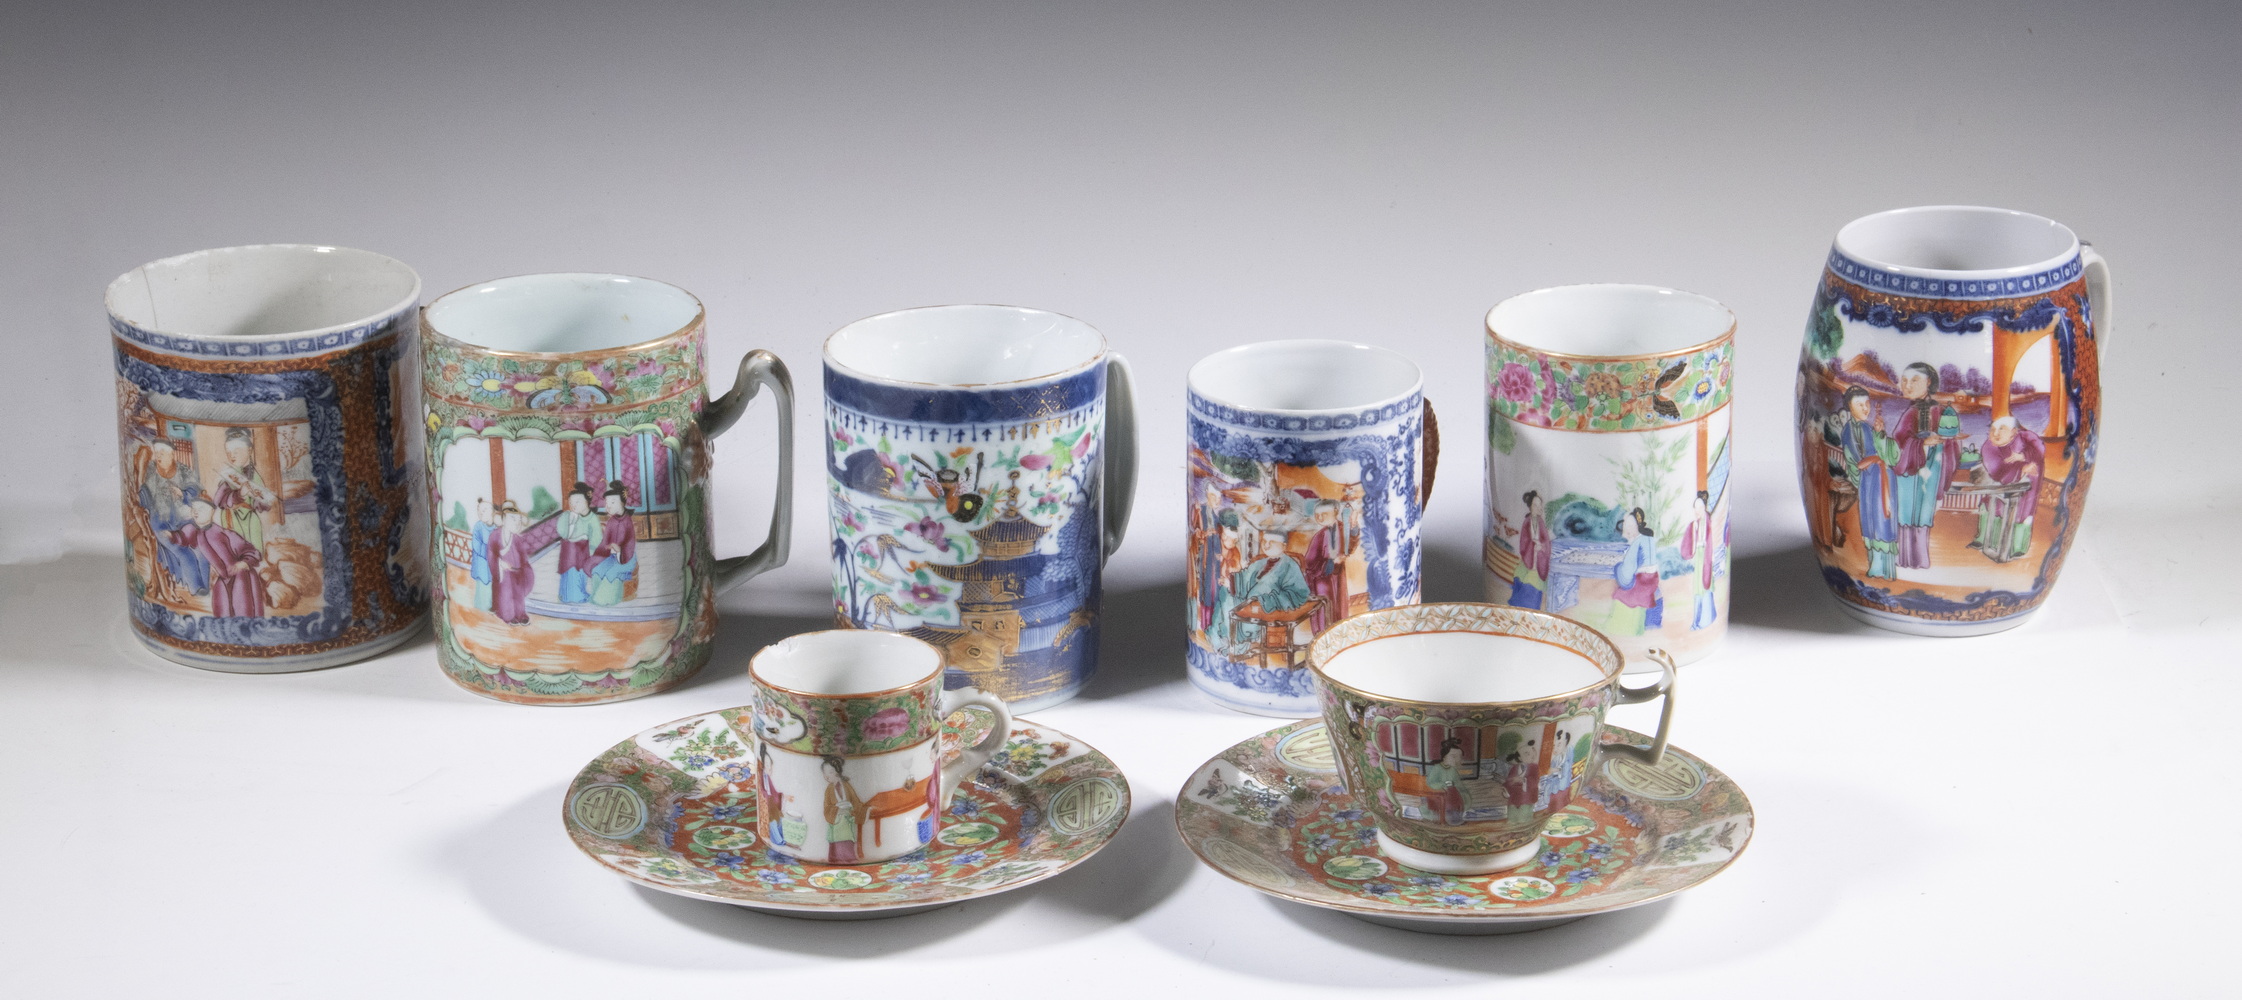 CHINESE PORCELAIN COLLECTION Group 2b1b3e